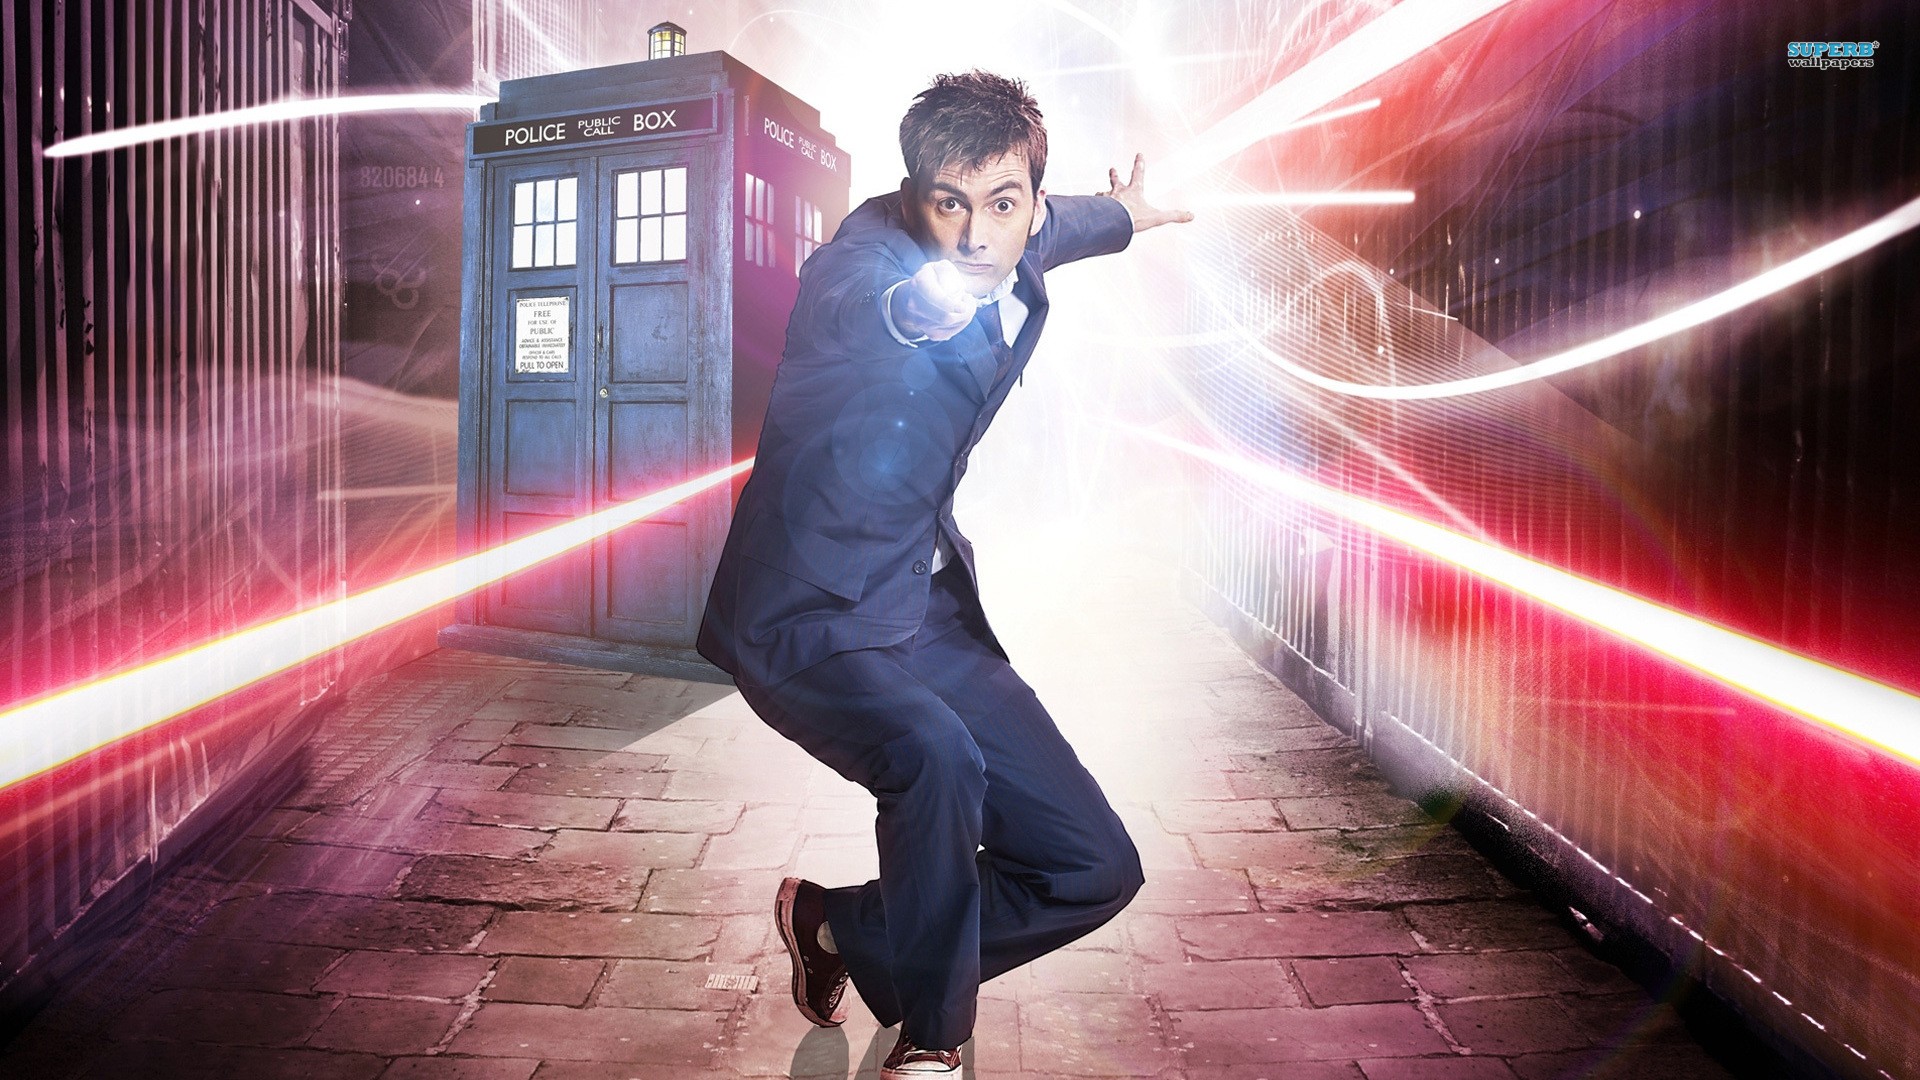 General 1920x1080 Doctor Who The Doctor TARDIS David Tennant Tenth Doctor TV series science fiction